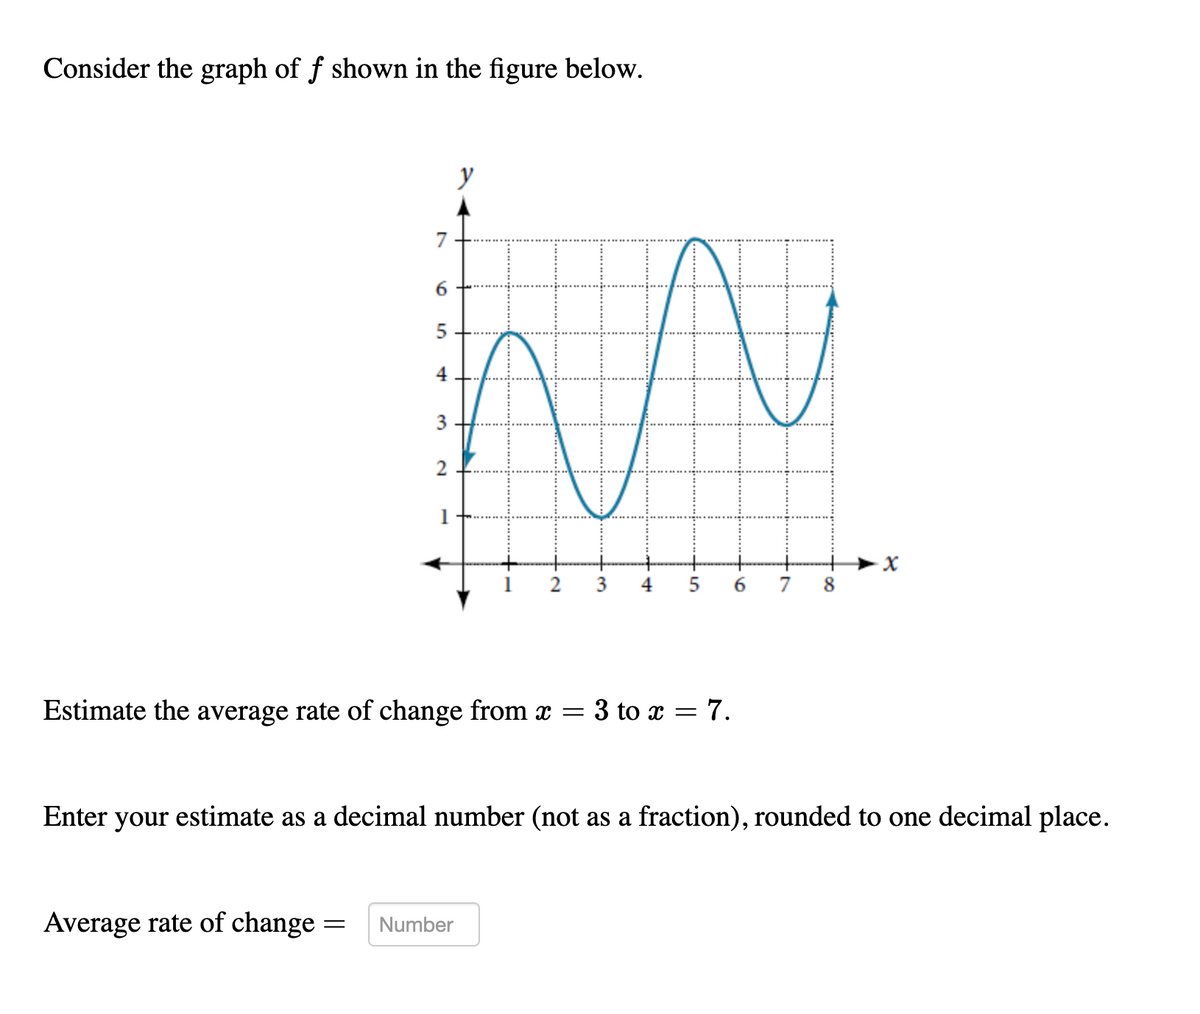 Consider the graph of f shown in the figure below.
7
4
3
2
1
3
4
6.
8
Estimate the average rate of change from x = 3 to x =7.
Enter
your
estimate as a decimal number (not as a fraction), rounded to one decimal place.
Average rate of change =
Number
6
